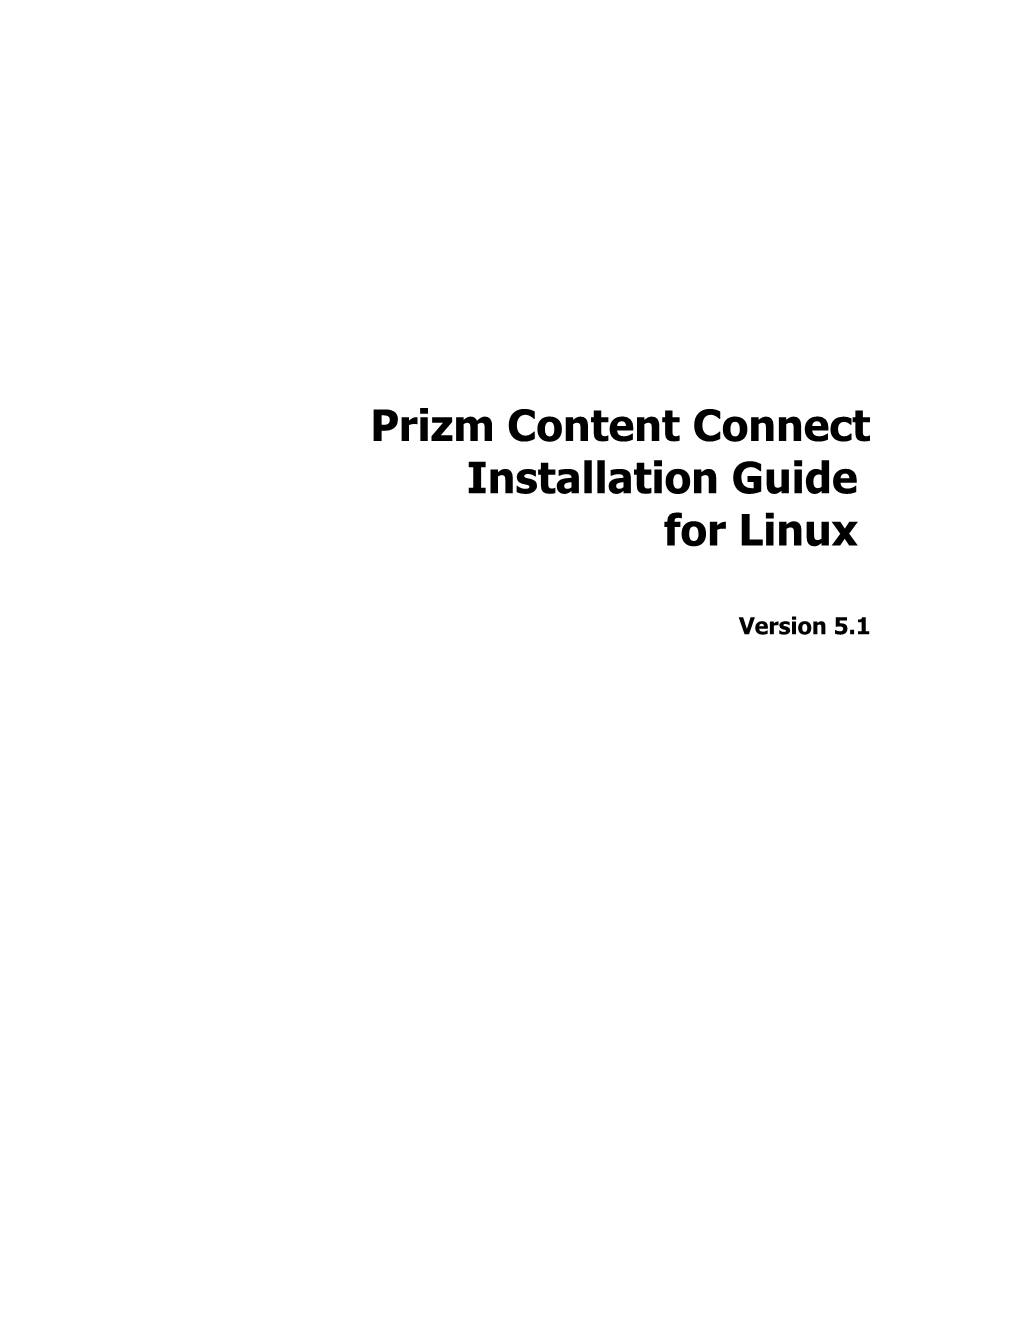 Prizm Content Connect Installation Guide for Linux